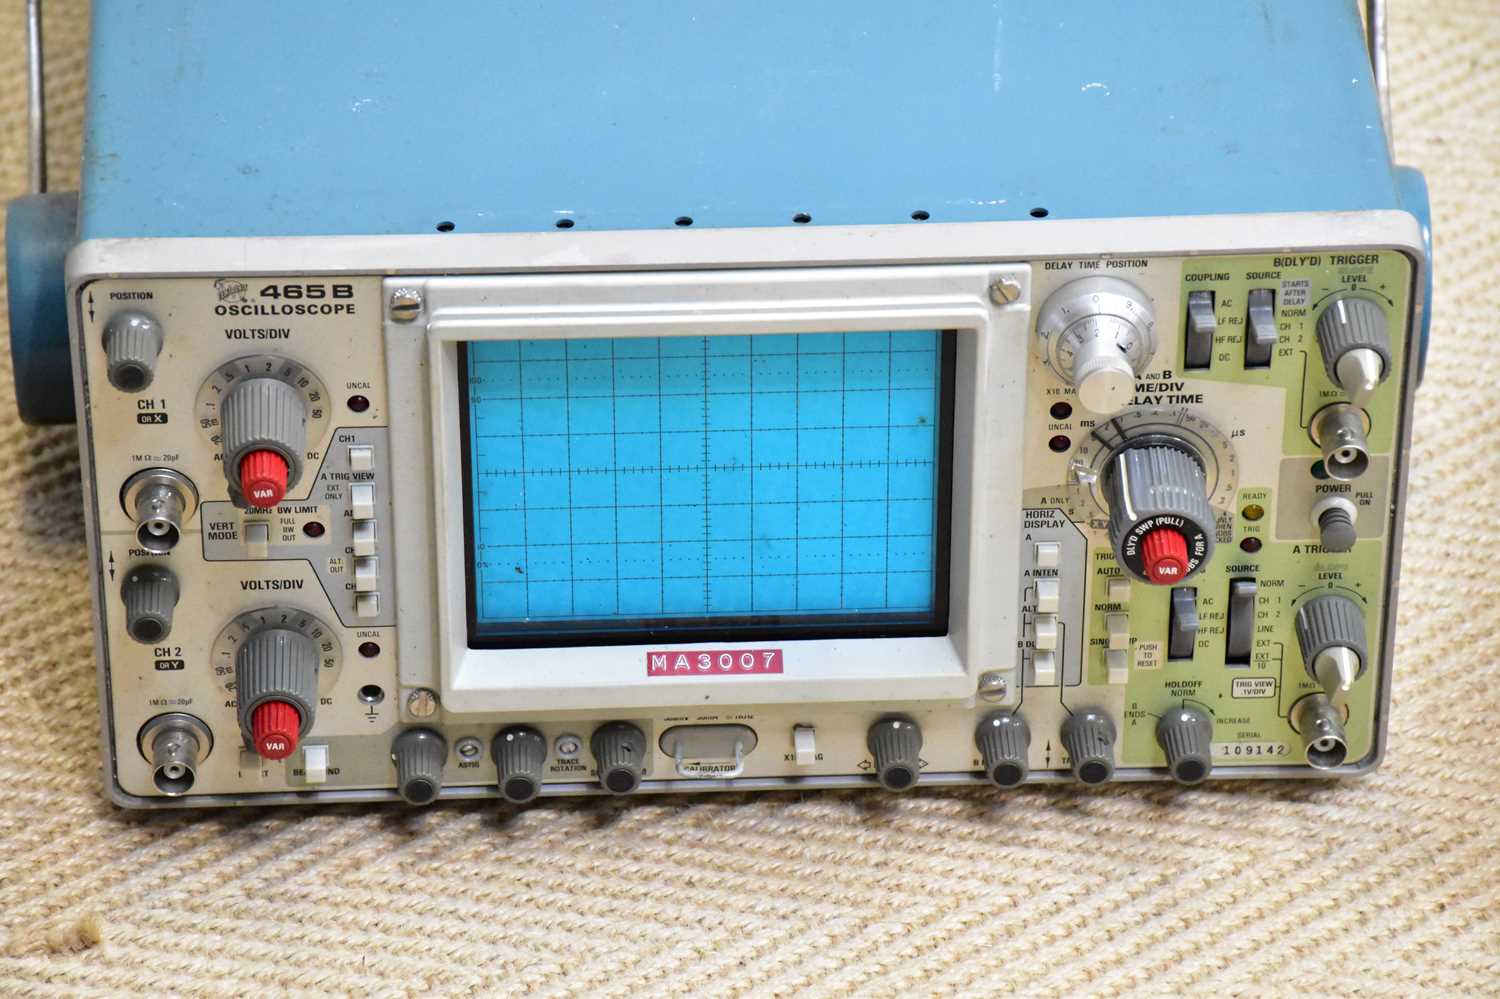 TEKTRONIX; a model 465B oscilliscope, with a powerline electronics regulated power supply and - Image 4 of 4